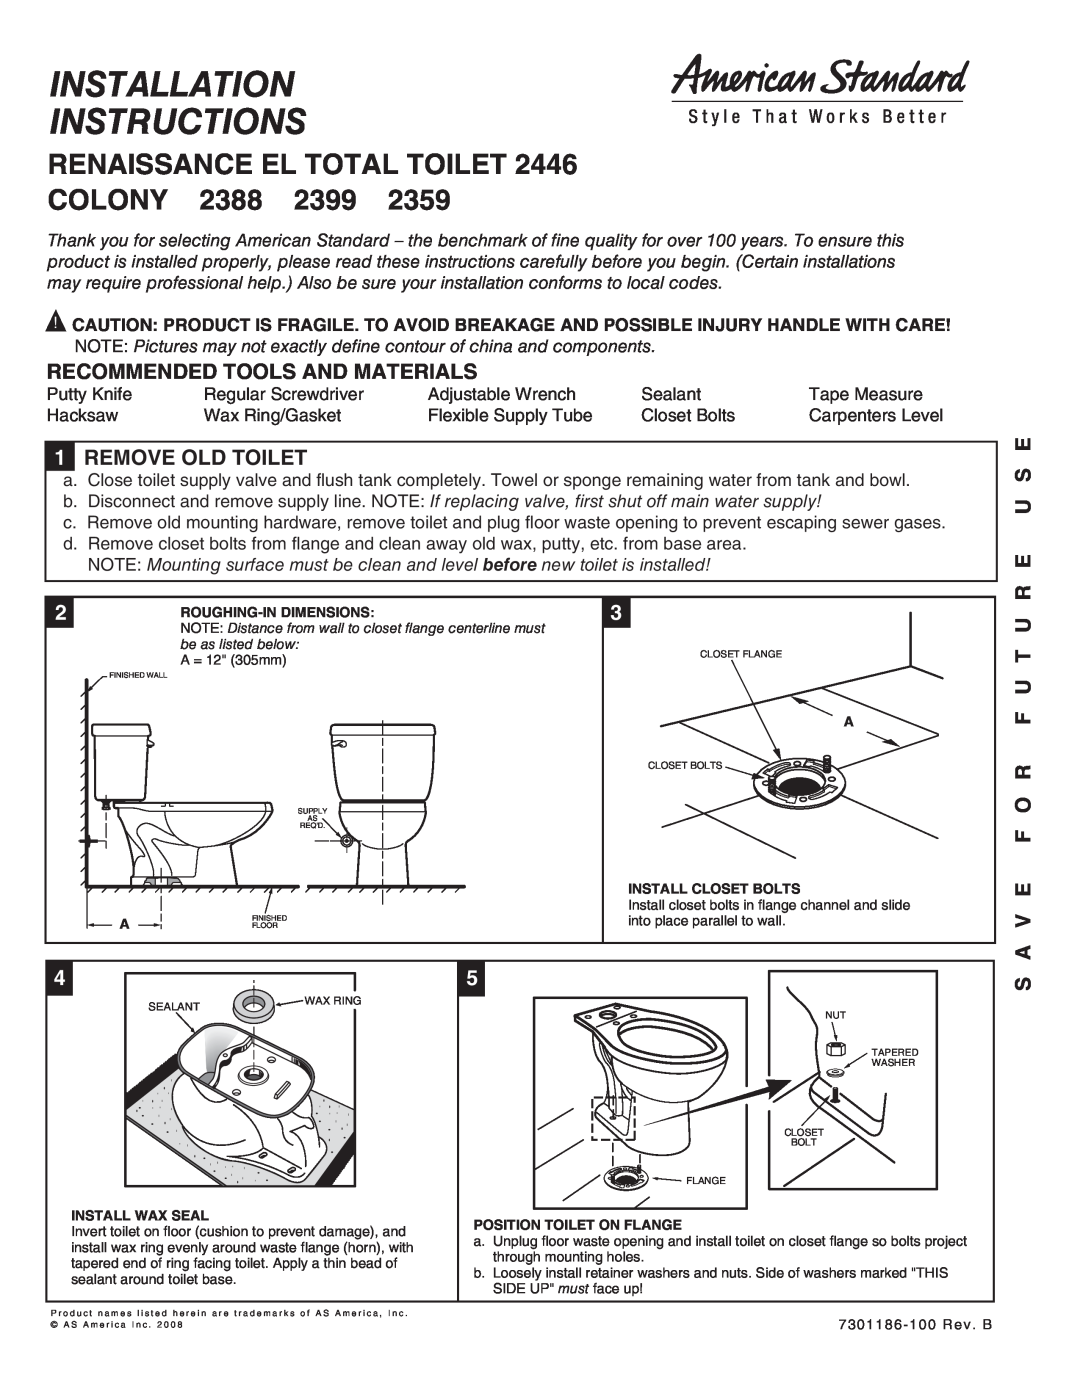 American Standard 2446 installation instructions Recommended Tools And Materials, 1REMOVE OLD TOILET, Sonoma 